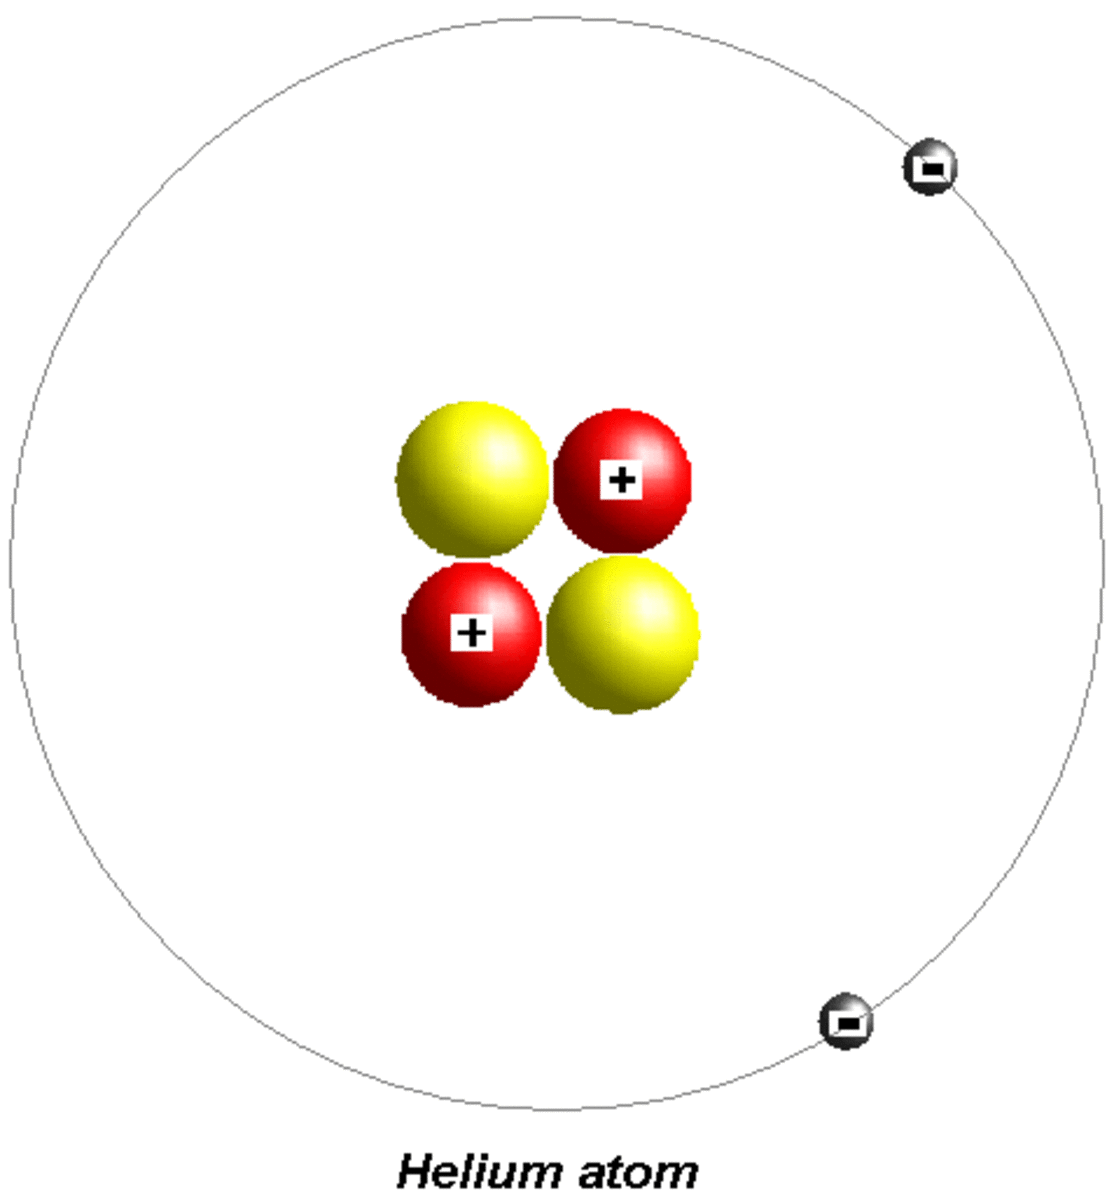 Helium 4 isotope has two neutrons and two protons in its nucleus.   The outer ring, or valence, contains two electrons.